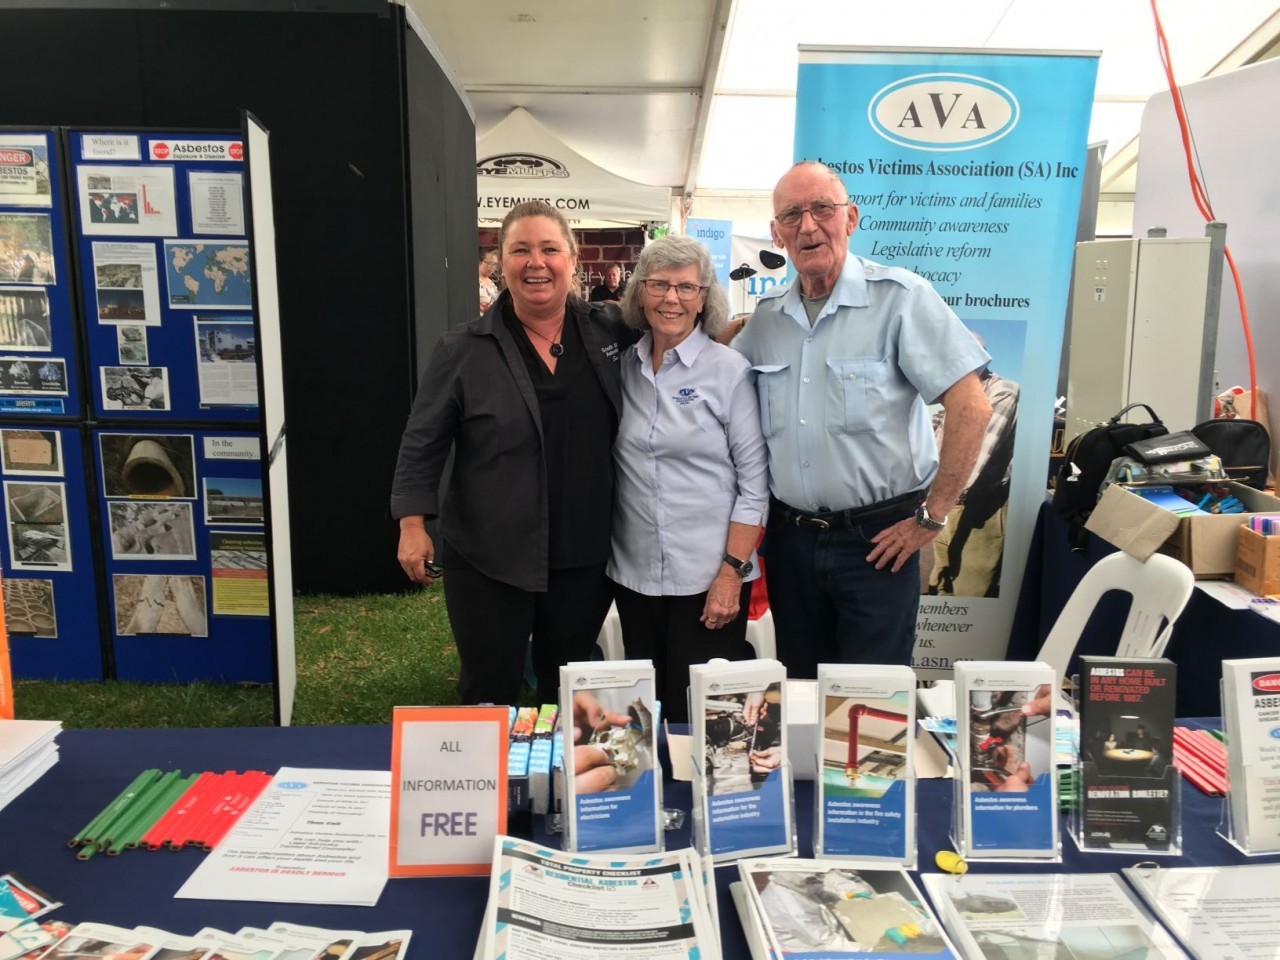 Sue from SE Asbestos joined our volunteers on the AVA stand